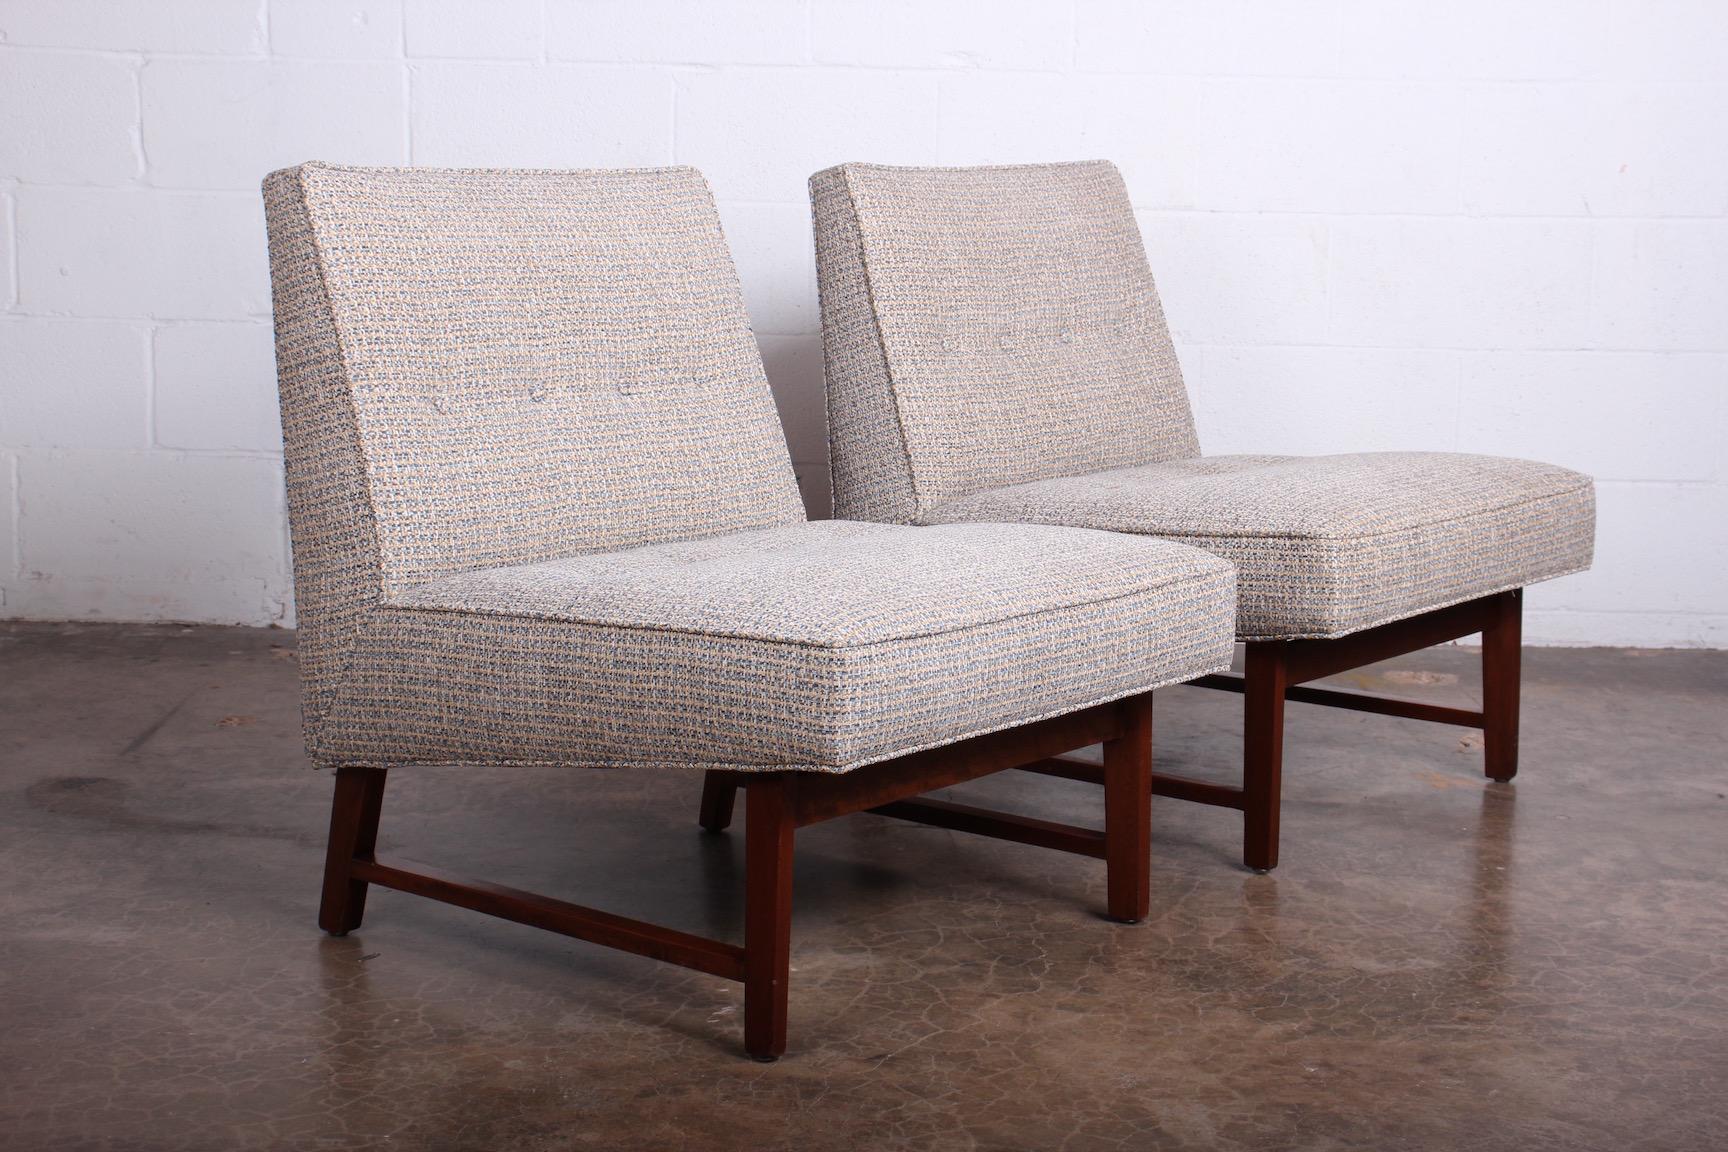 Mahogany Pair of Slipper Chairs by Edward Wormley for Dunbar For Sale